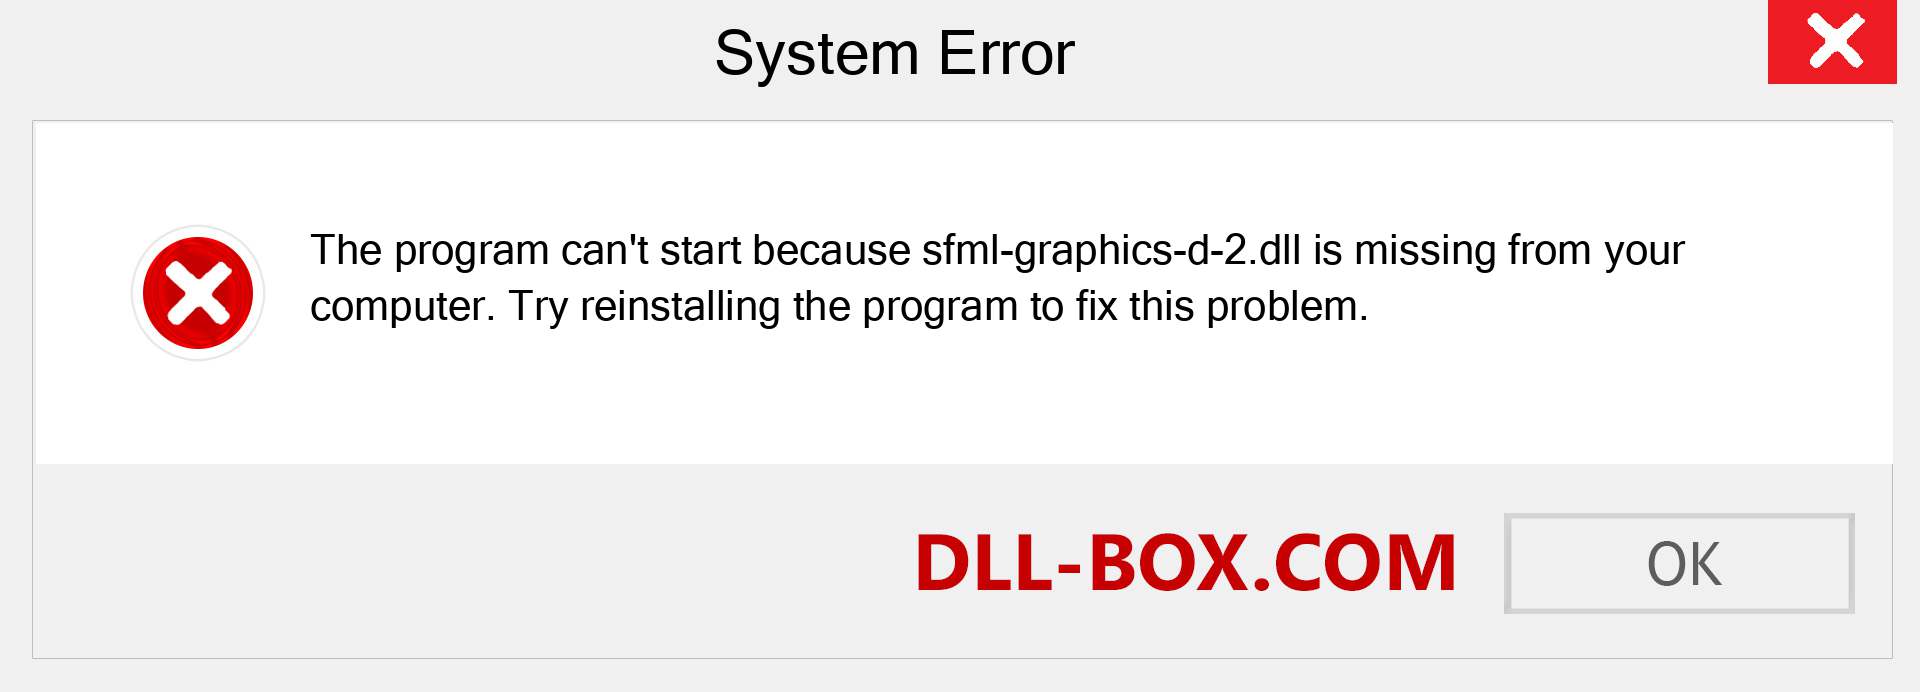  sfml-graphics-d-2.dll file is missing?. Download for Windows 7, 8, 10 - Fix  sfml-graphics-d-2 dll Missing Error on Windows, photos, images